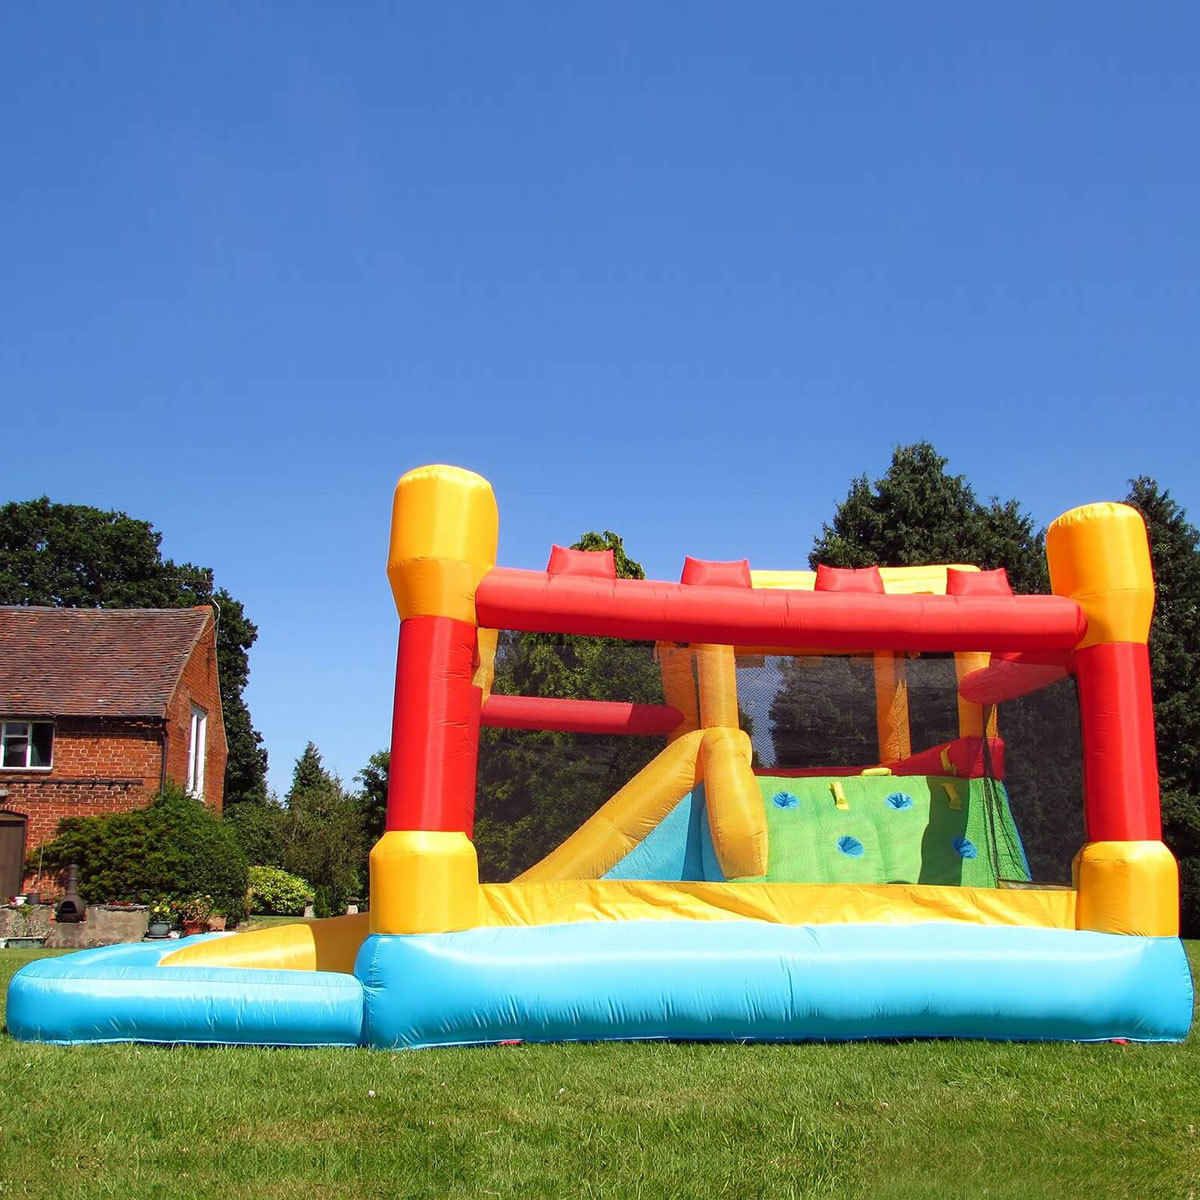 BeBop 13ft Fortress Bouncy Castle and Water Slide (3-10 Years)